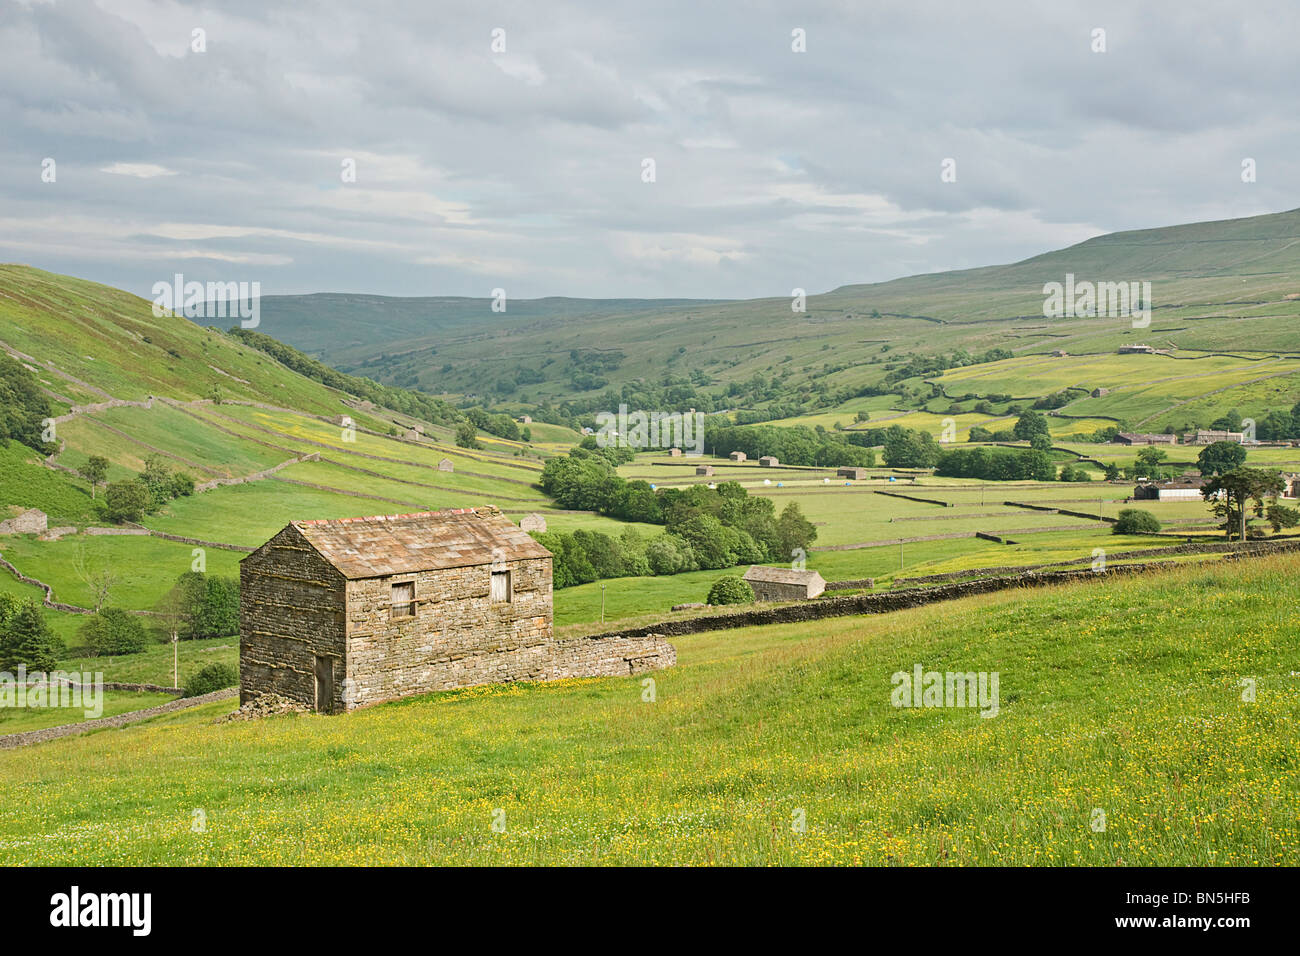 Upper Swaledale. Picture taken from above Thwaite. Shows field barn and hay meadows characteristic of the area in mid-summer. Stock Photo